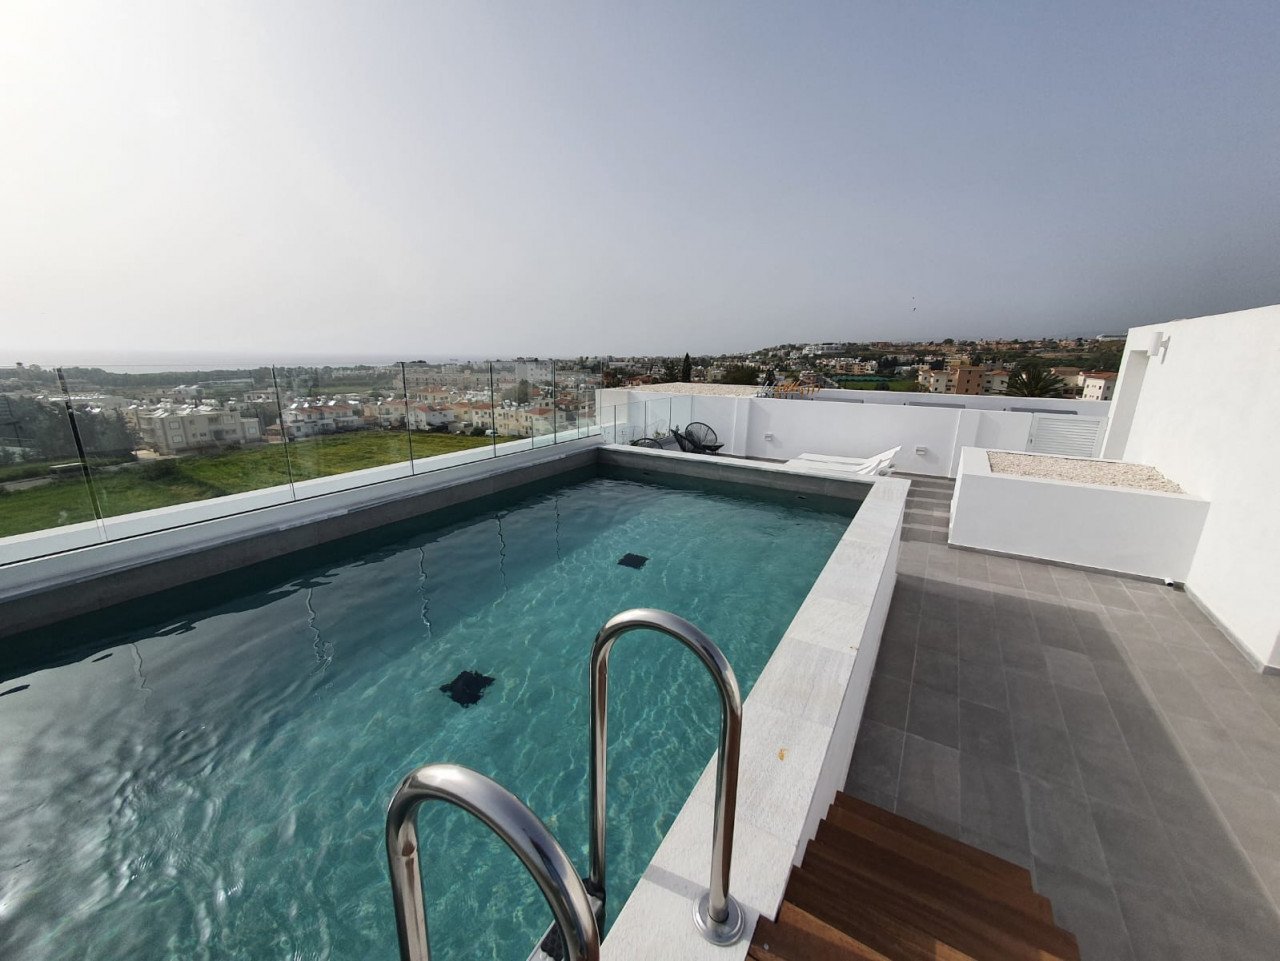 Property for Rent: Apartment (Flat) in Kato Paphos, Paphos for Rent | Key Realtor Cyprus